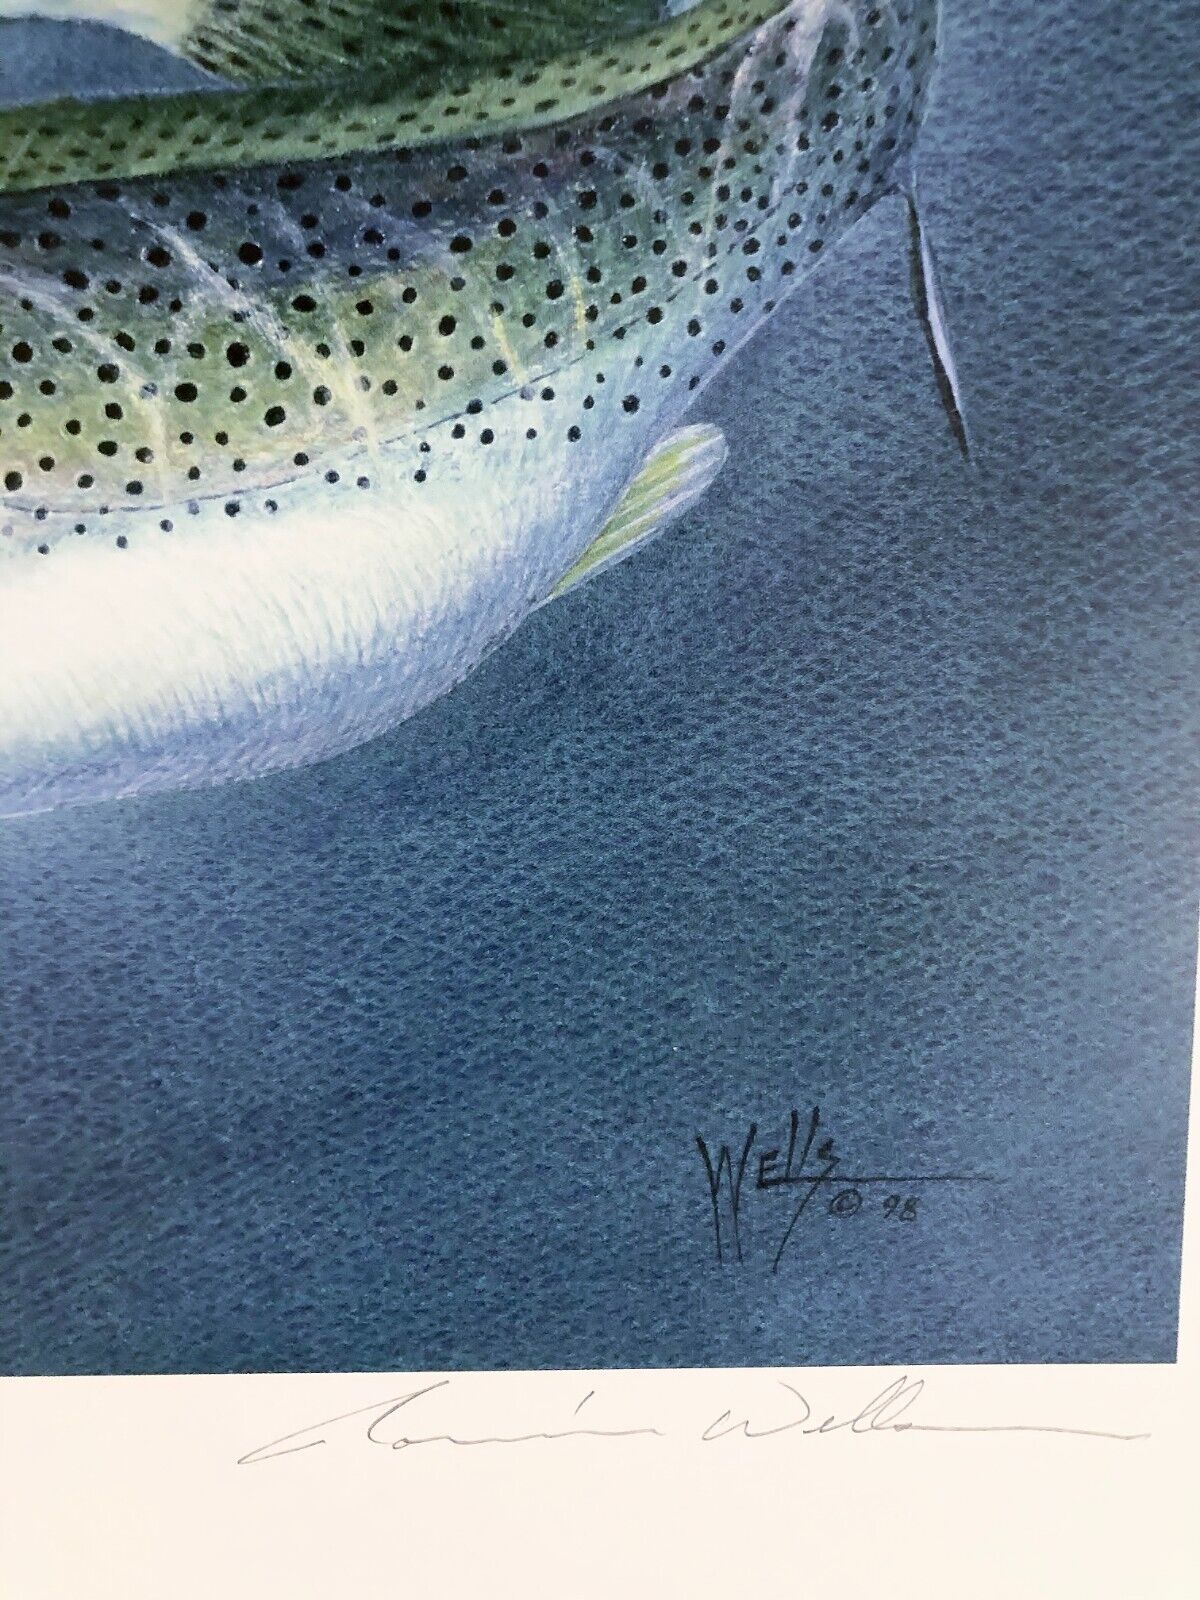 Ronnie Wells Trout Run Lithograph With Remarque Mint - Brand New Sporting Frame Без бренда - фотография #4